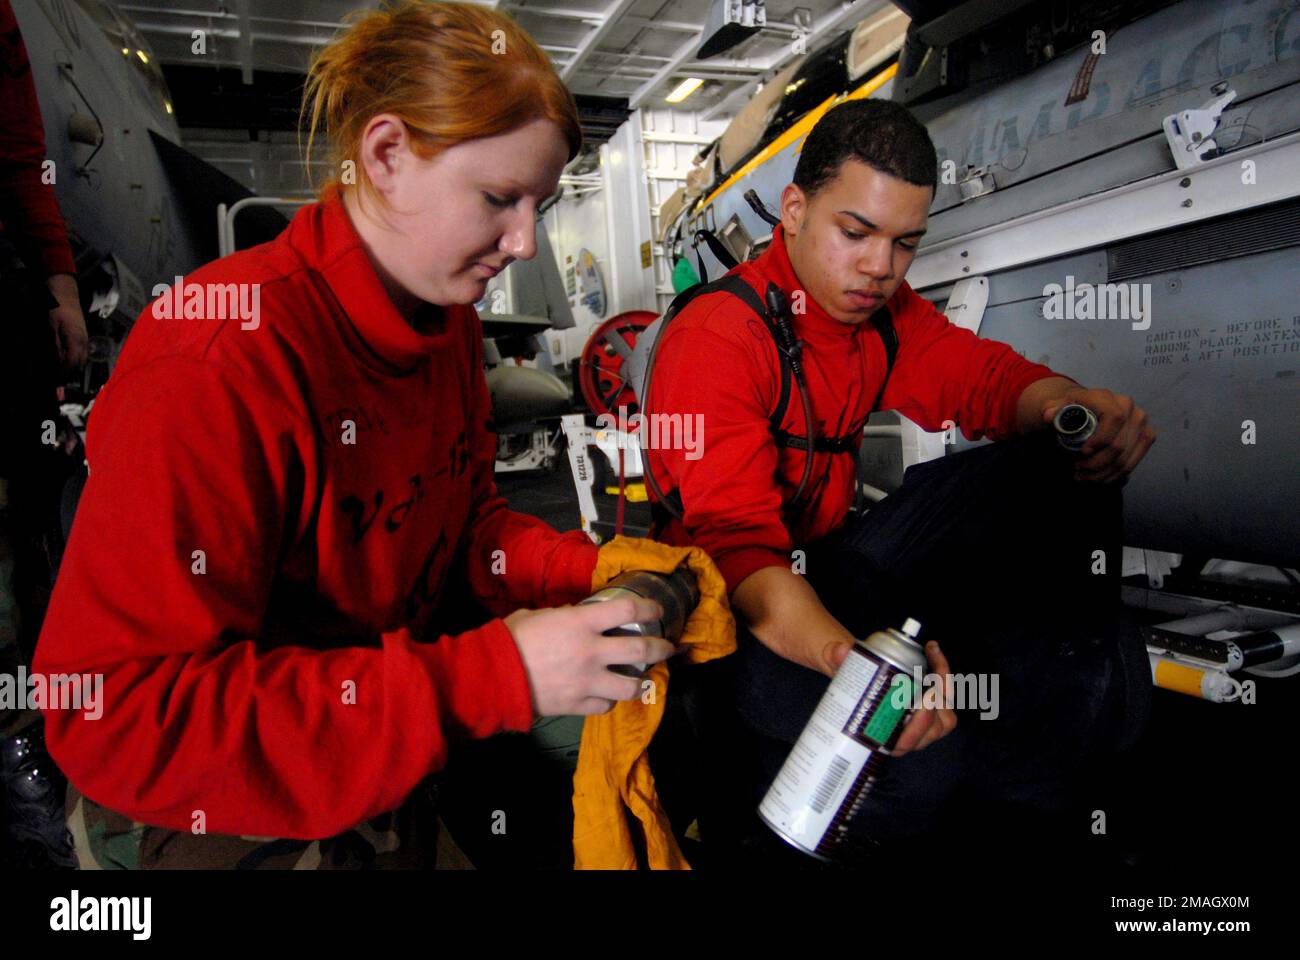 070128-N-2659P-121. [Complete] Scene Caption: U.S. Navy Aviation Ordnanceman AIRMAN Juan Ovales (right) hands tools to Aviation Ordnanceman 3rd Class Katherine Gutherie (left) as they perform maintenance on a bomb rack injection foot, for a a Tactical Electronic Warfare Squadron 138 (VAQ-138,'Yellowjackets') EA-6B Prowler electronic warfare aircraft, in the hangar bay aboard the Nimitz Class Aircraft Carrier USS JOHN C. STENNIS (CVN 74) on Jan. 28, 2007, while the STENNIS and Carrier Air Wing 9 (CVW-9) are conducting carrier qualifications of the coast of Southern California prior to transitin Stock Photo